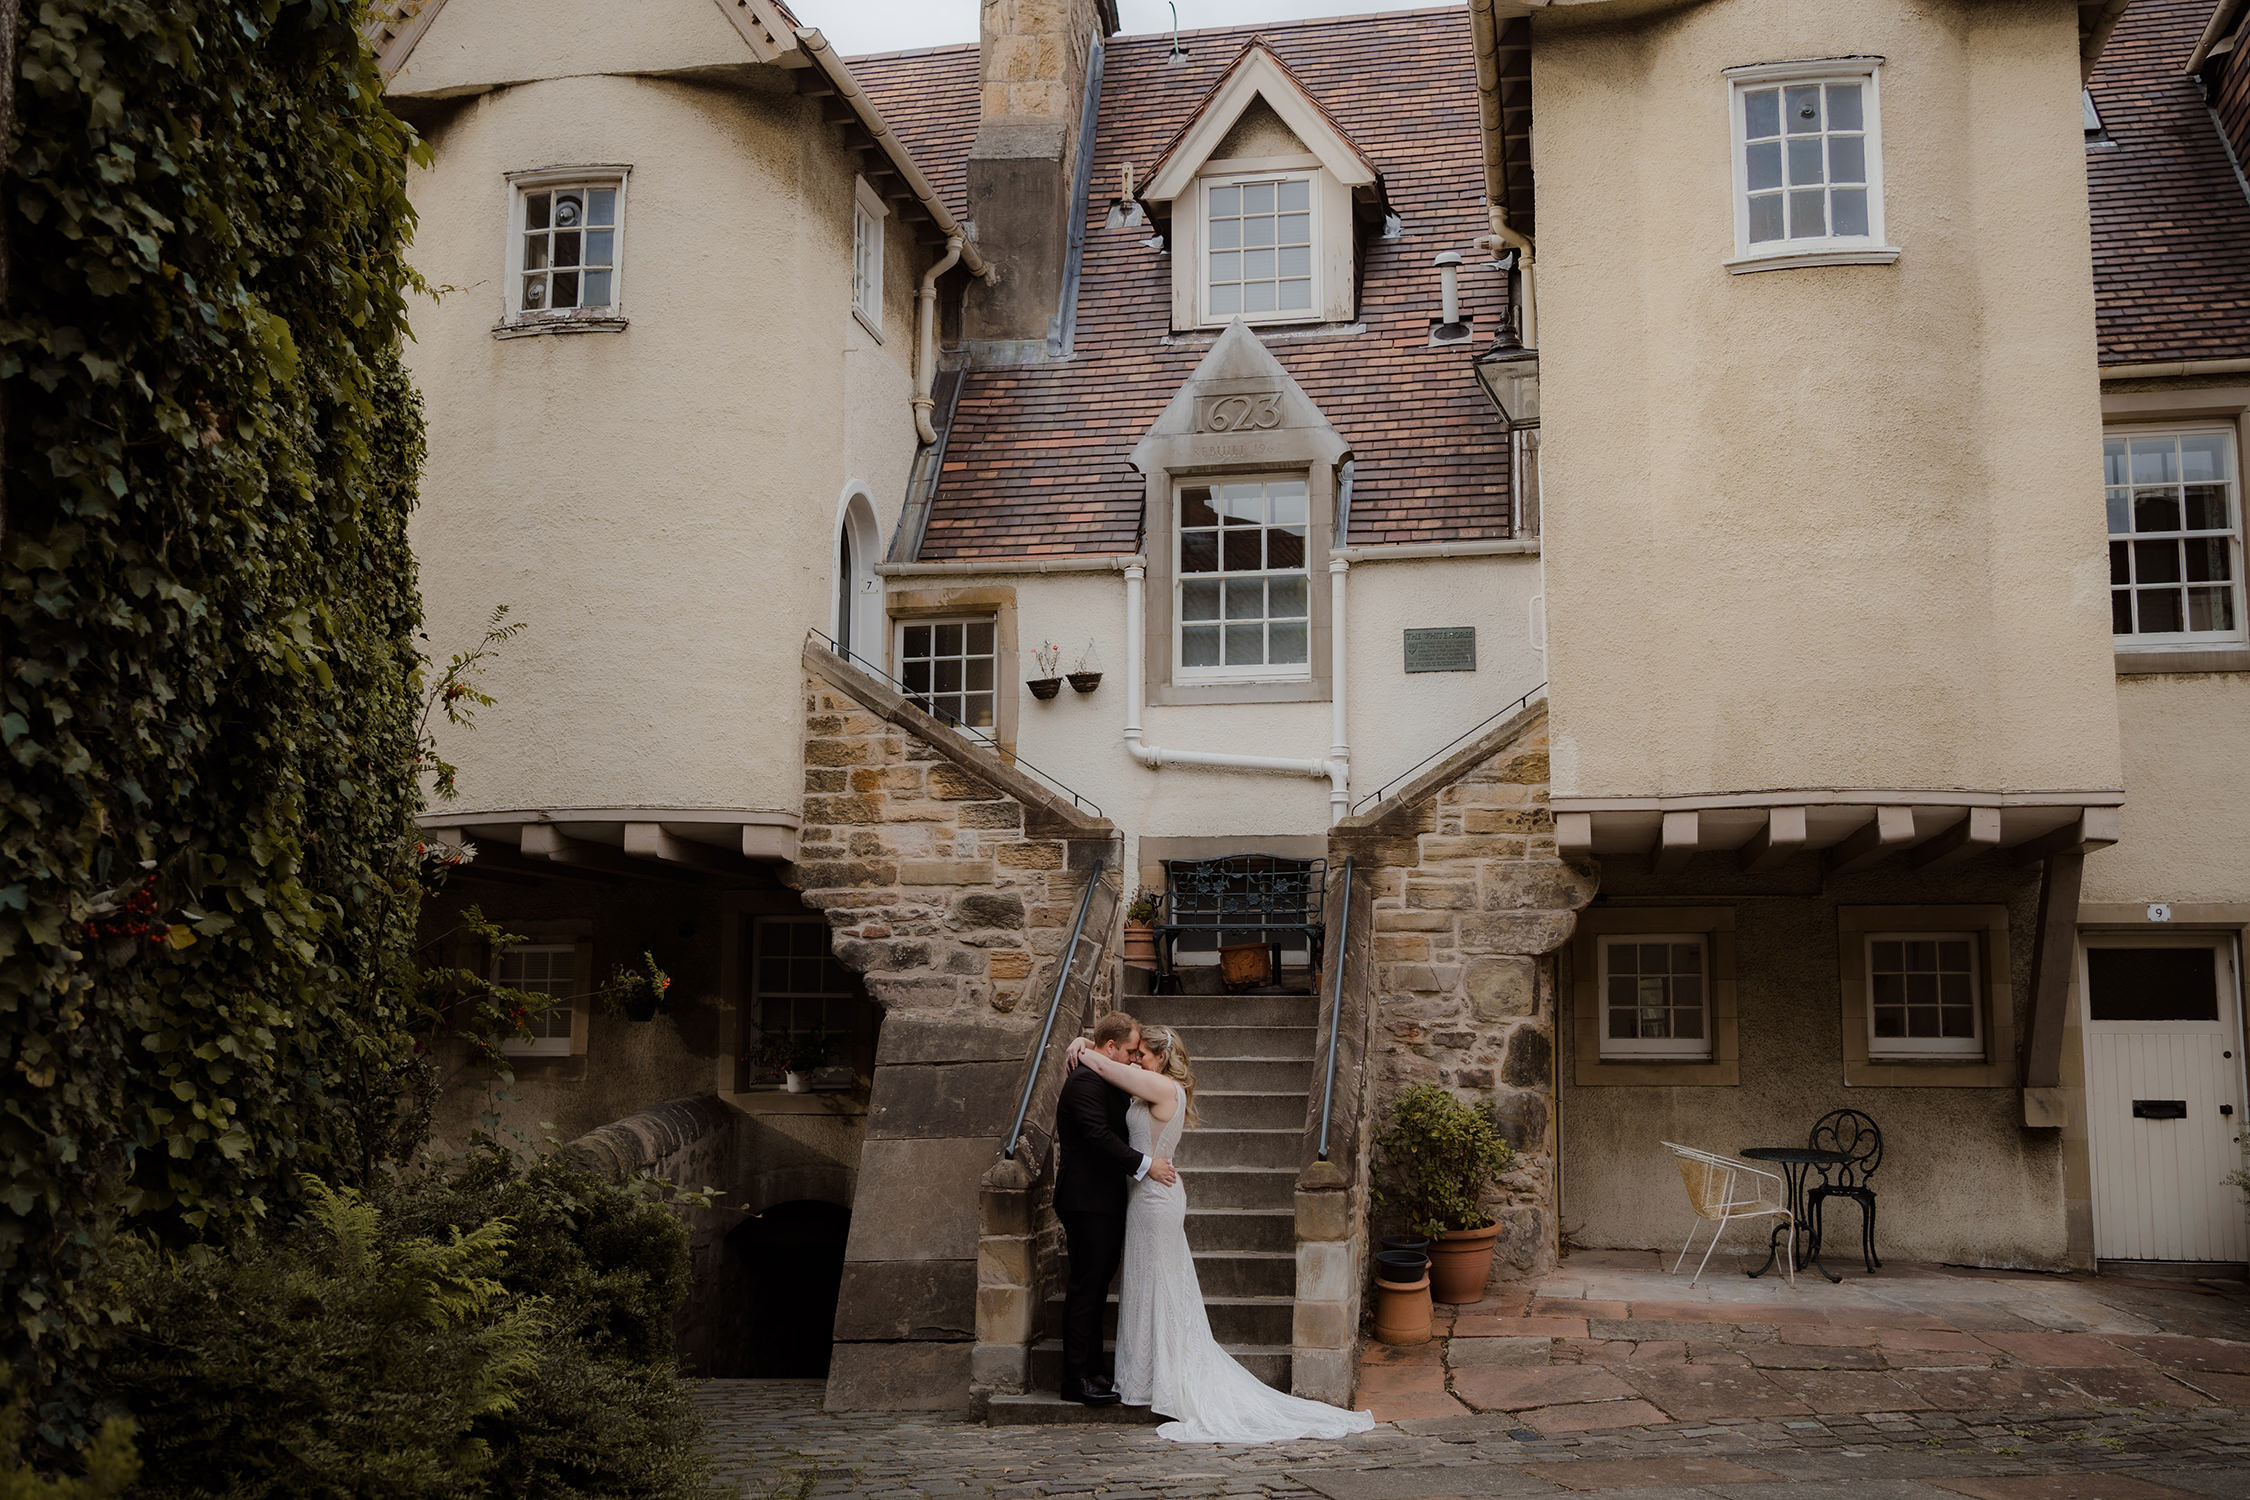 Elopement photoshoot at White Horse Close on Royal Mile